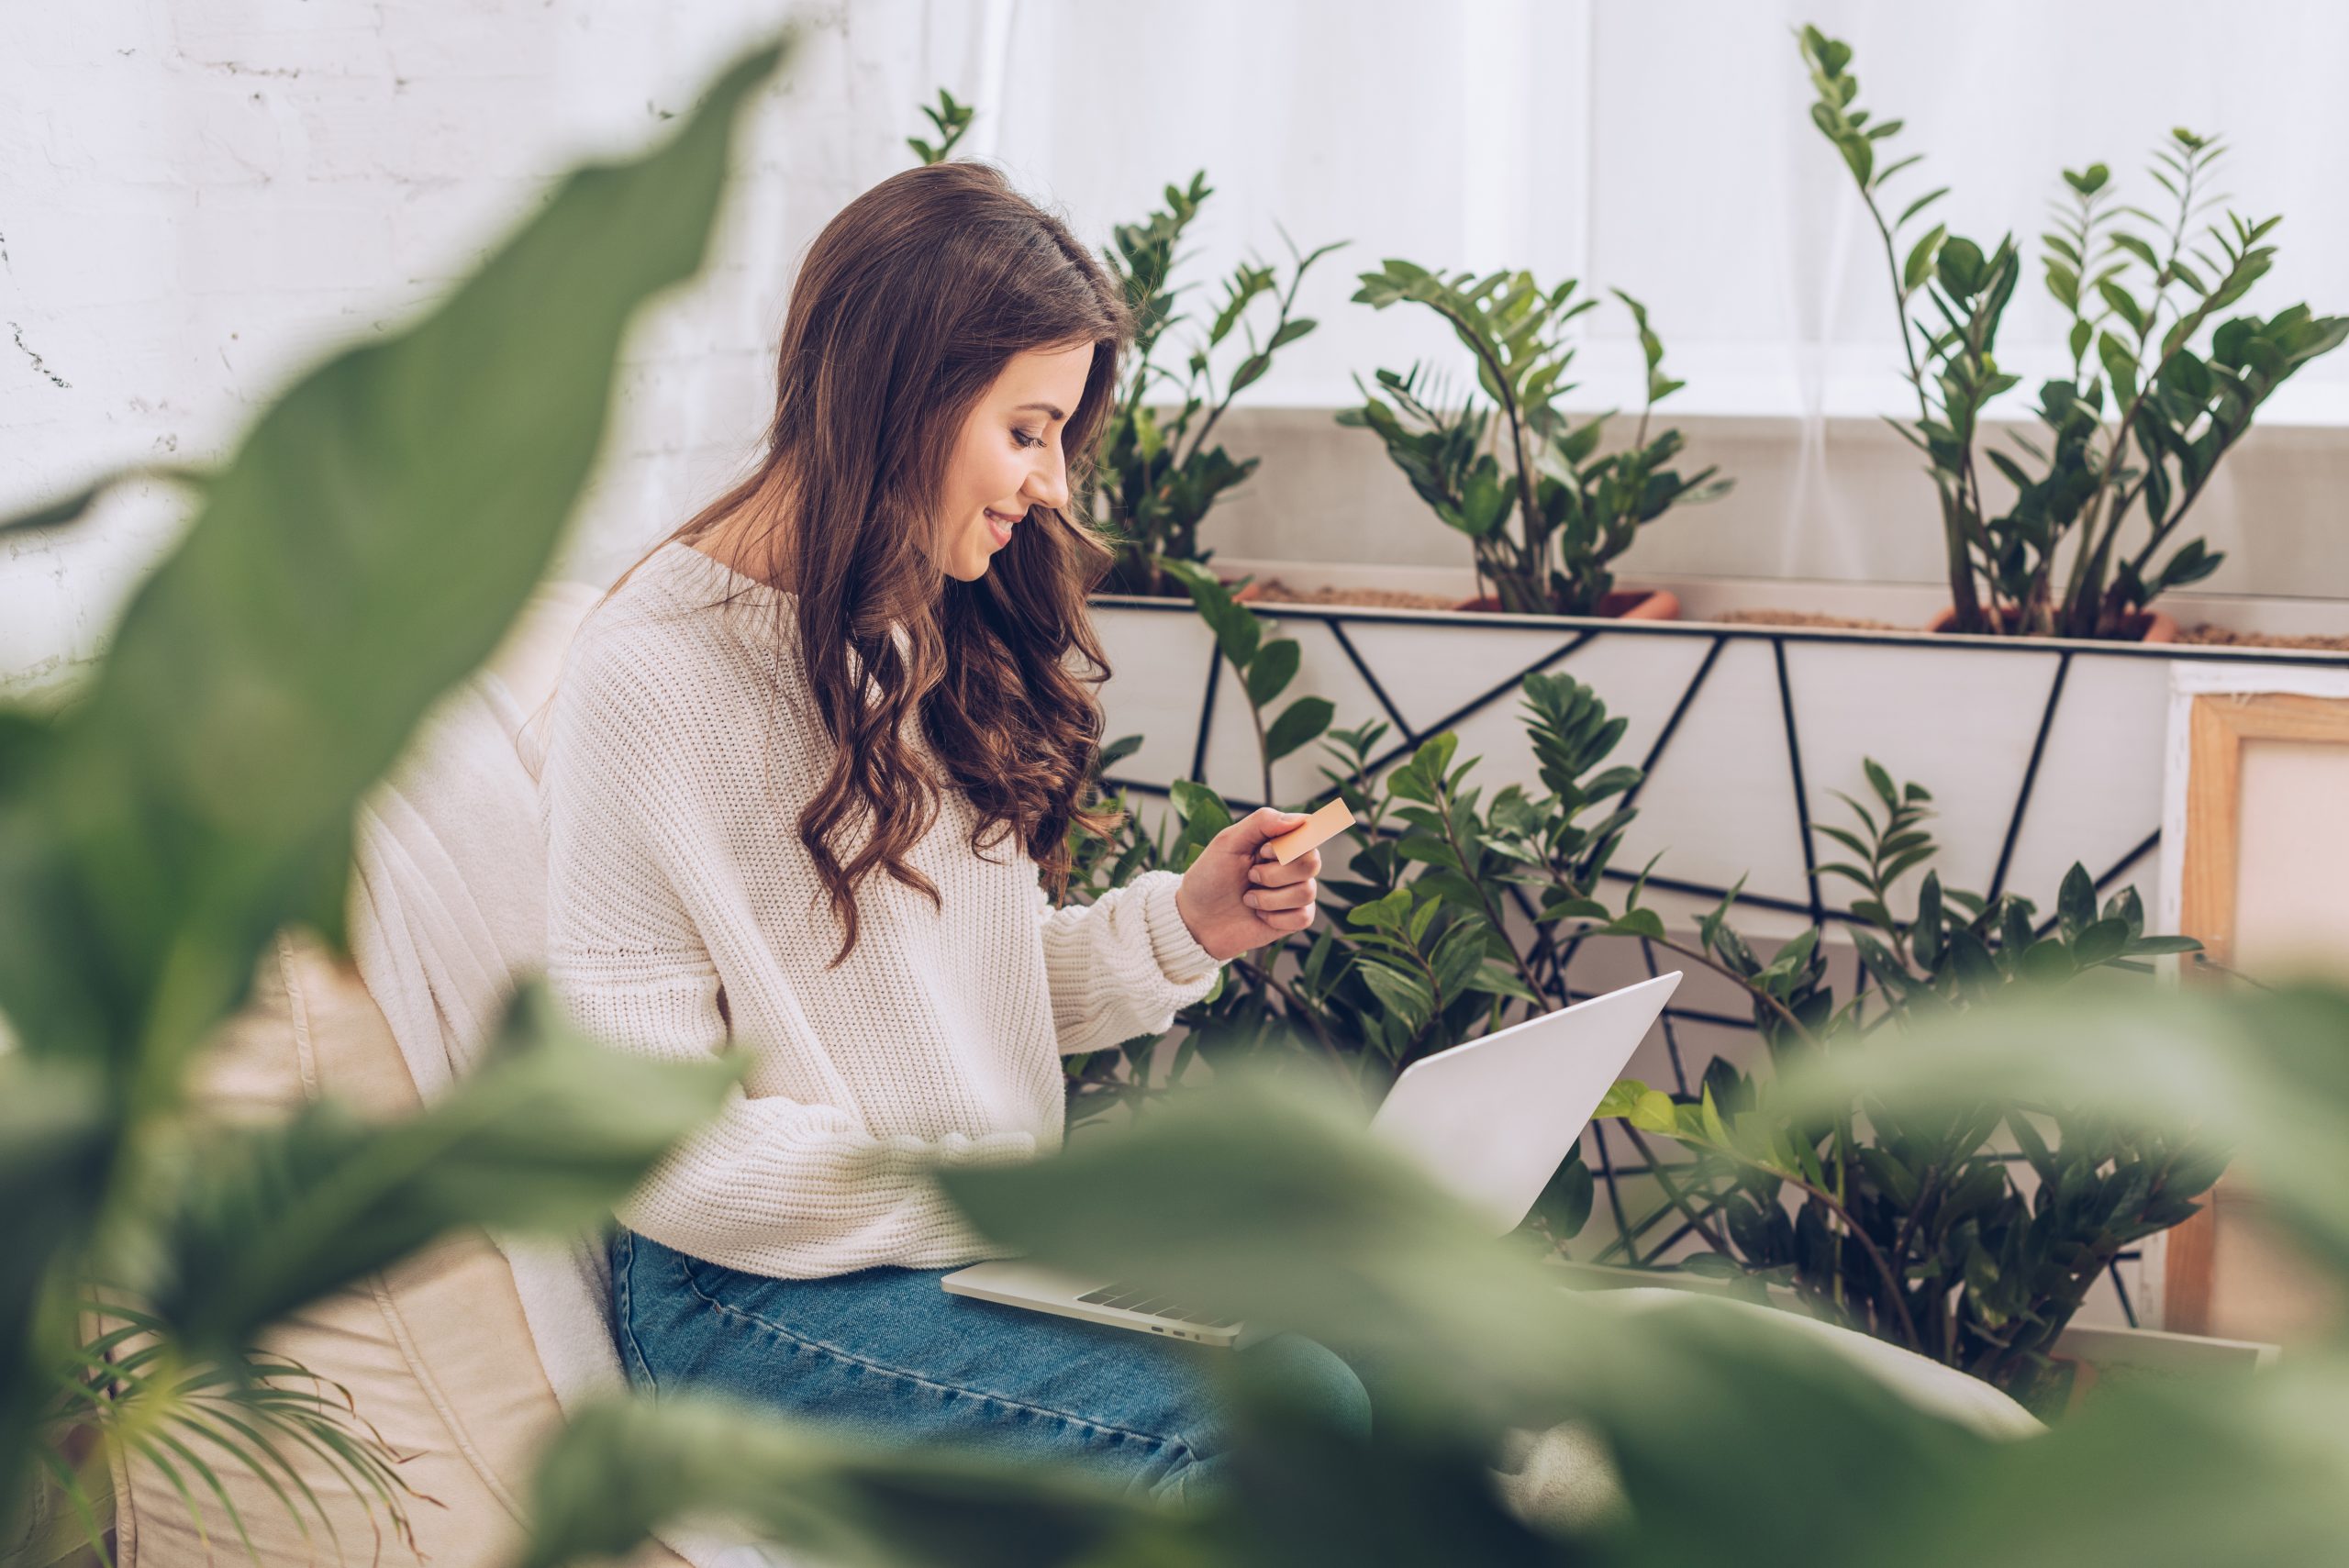 smiling woman holding credit card and looking at laptop siting among houseplants